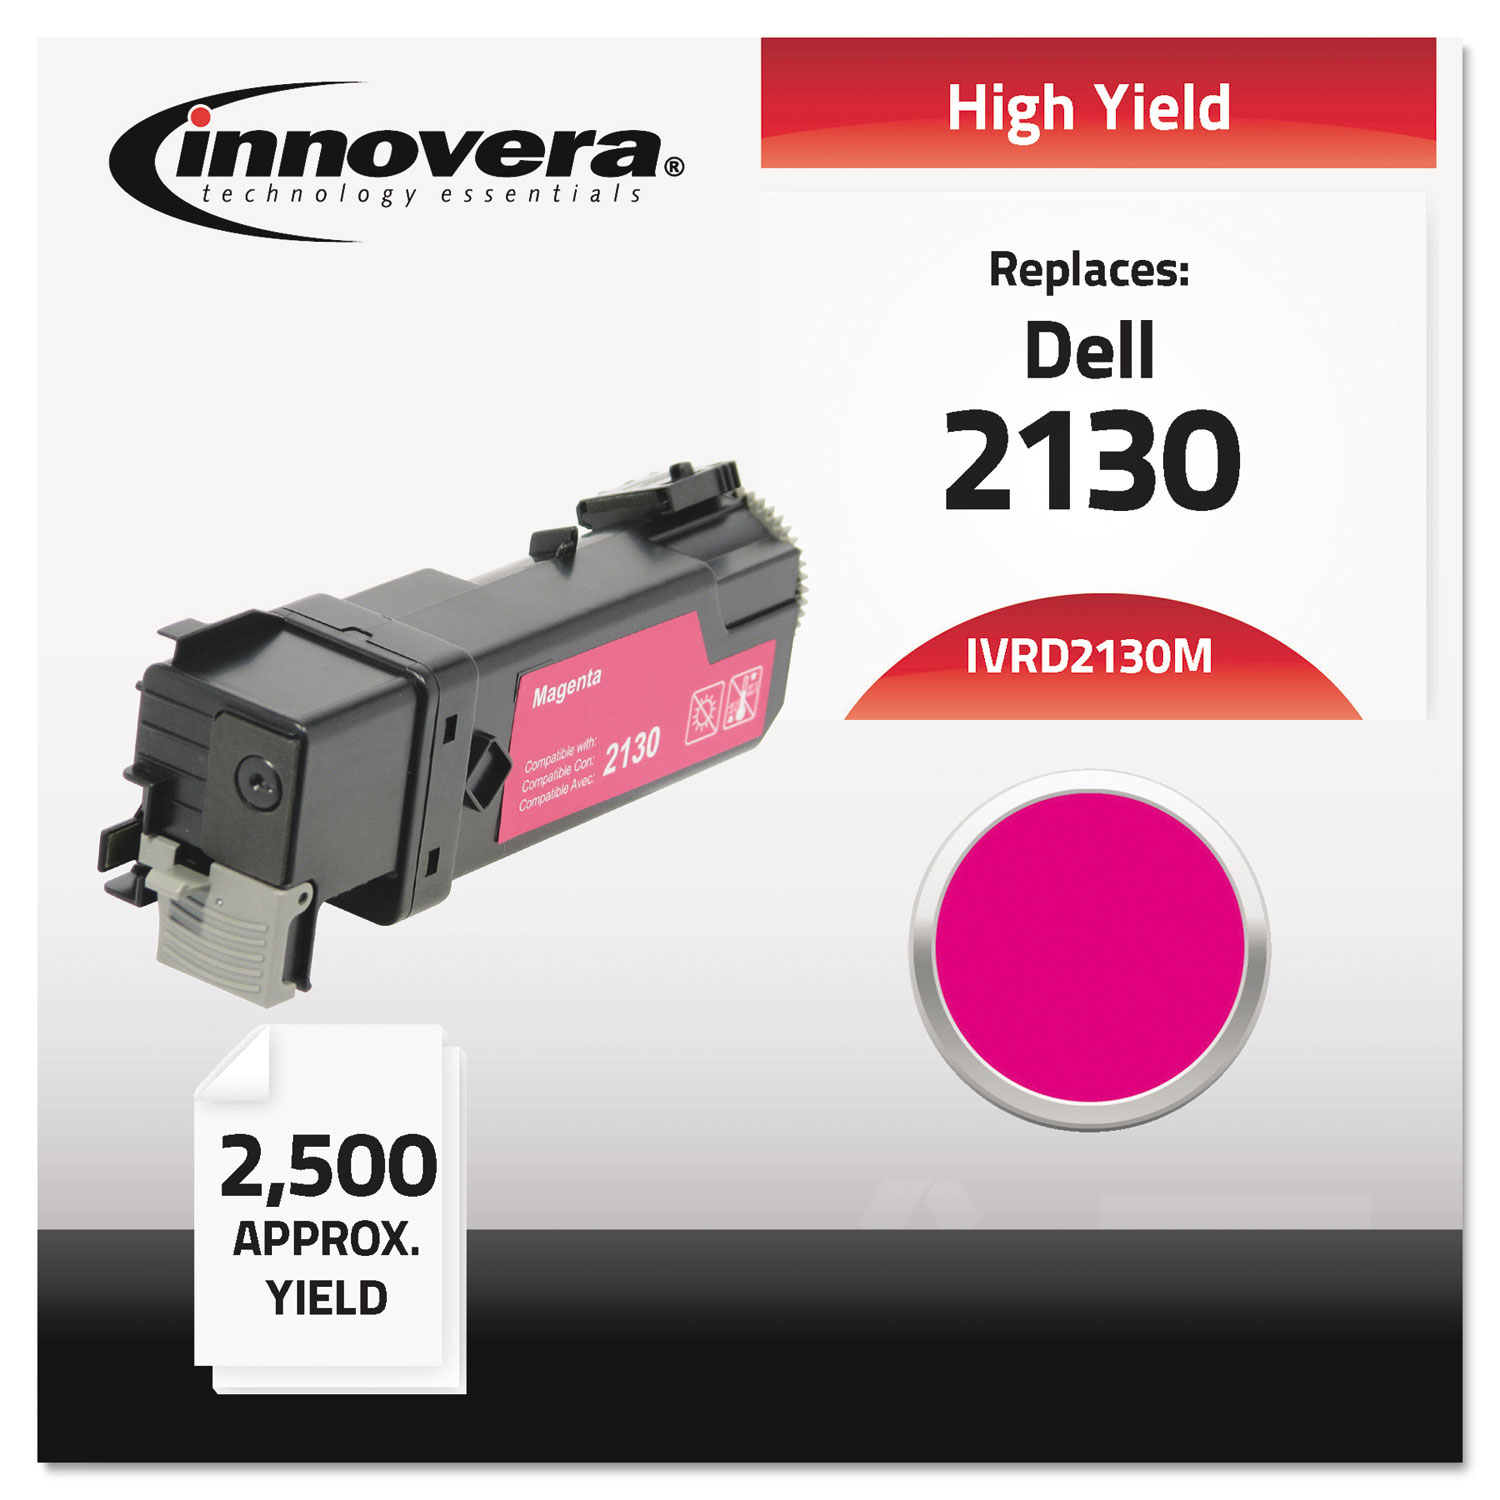  Innovera IVRD2130M Remanufactured 330-1433 (2130) High-Yield Toner, 2500 Page-Yield, Magenta (IVRD2130M) 